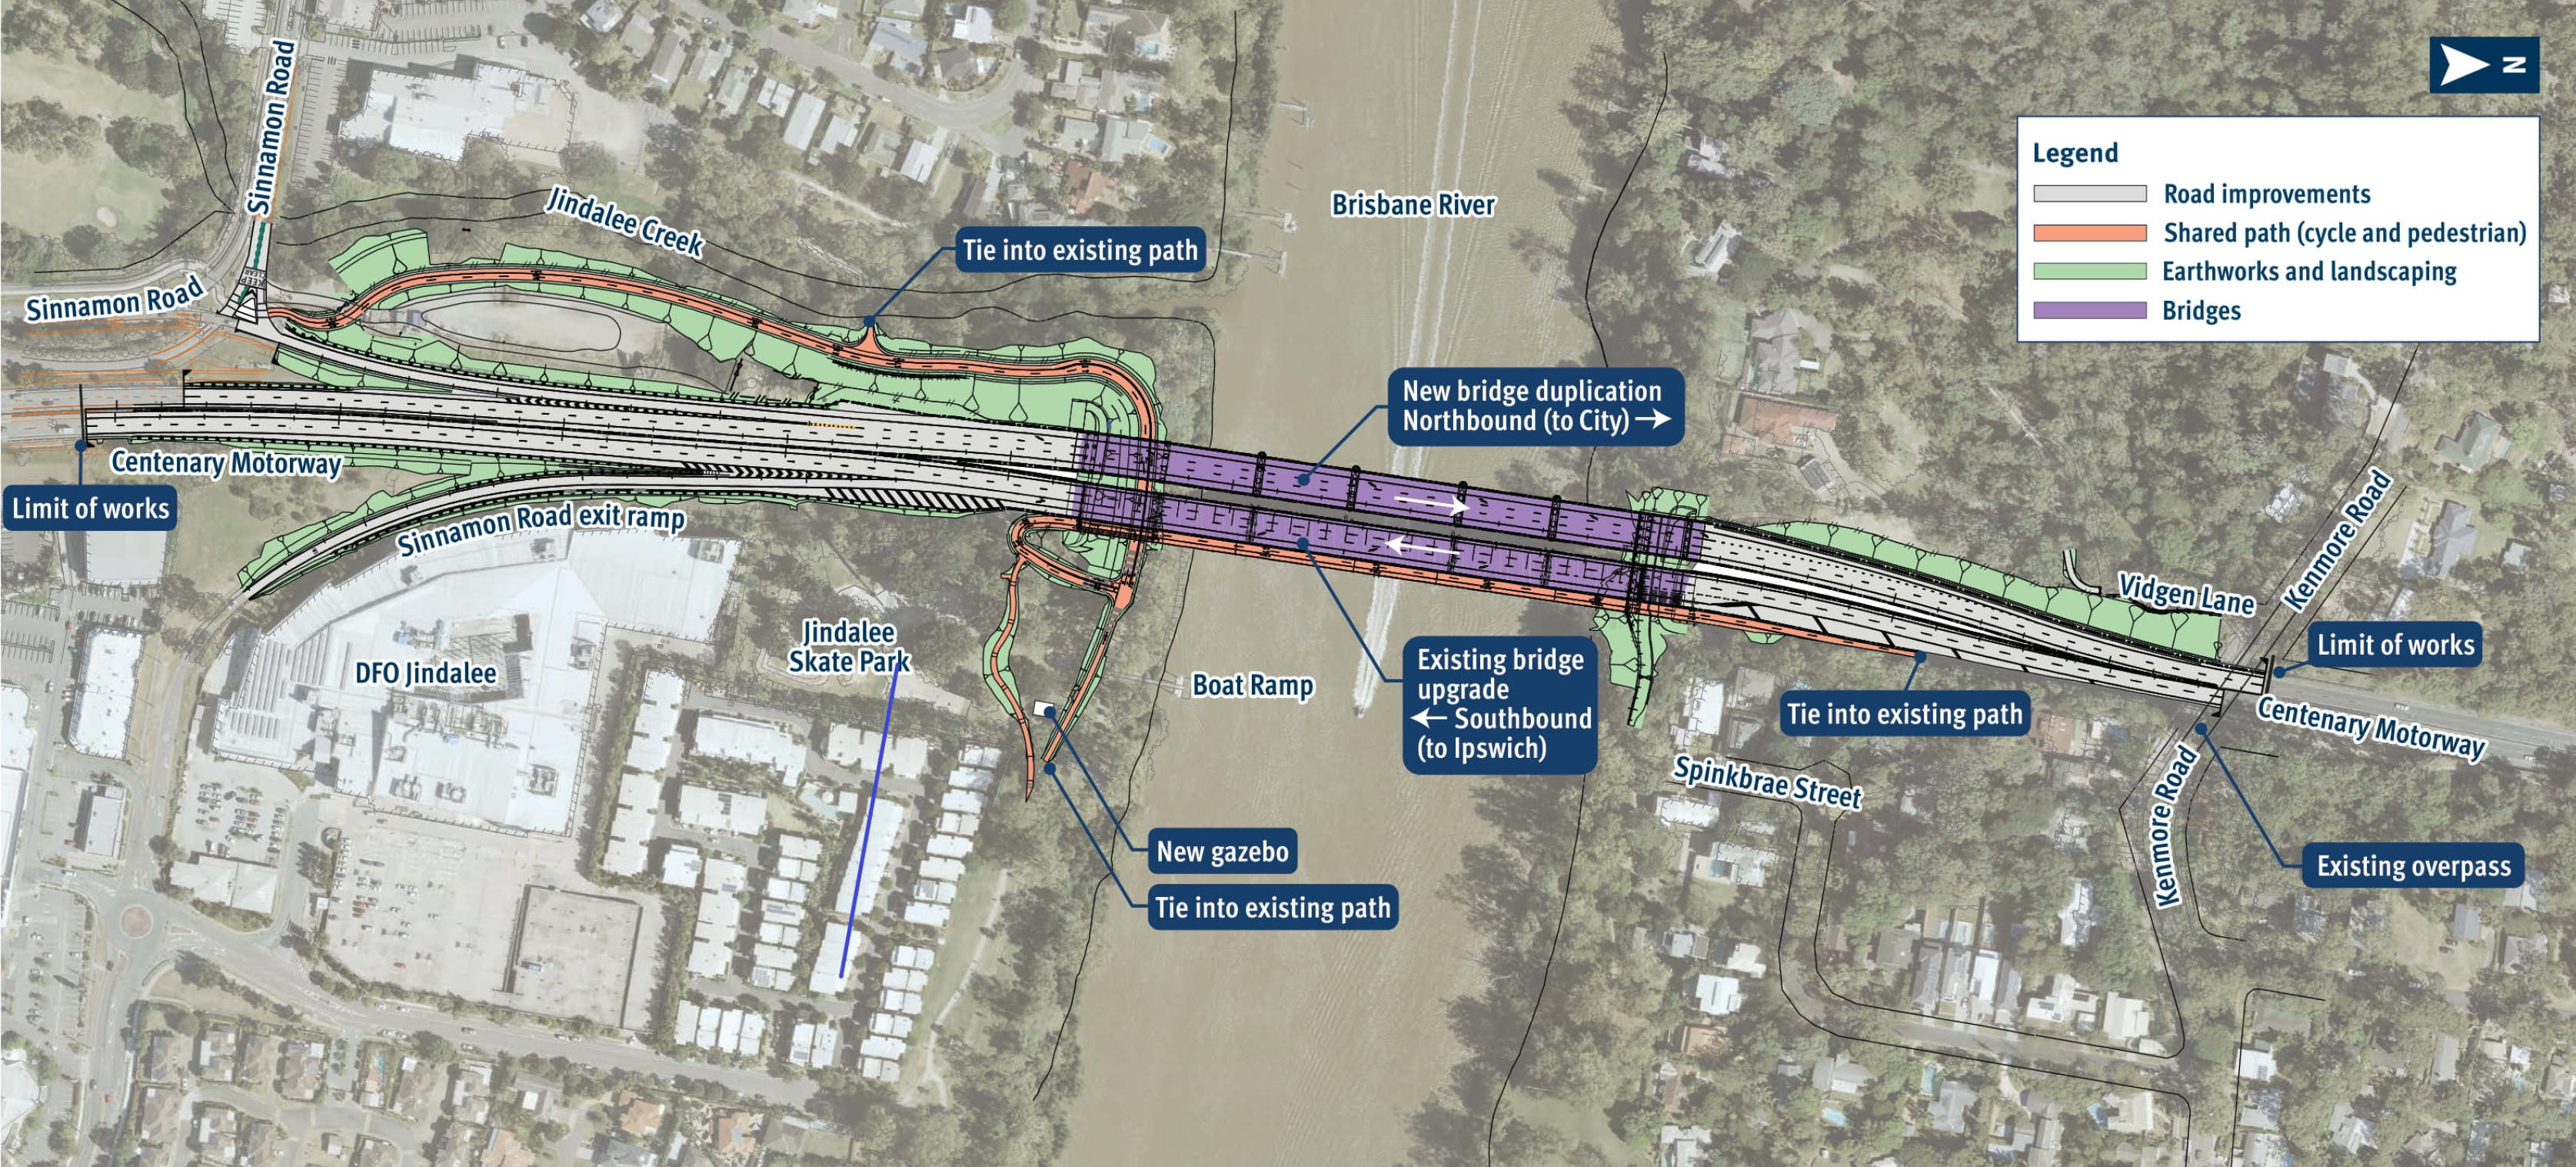 Image shows an updated concept project map for the Centenary Bridge Upgrade project as at July 2022.